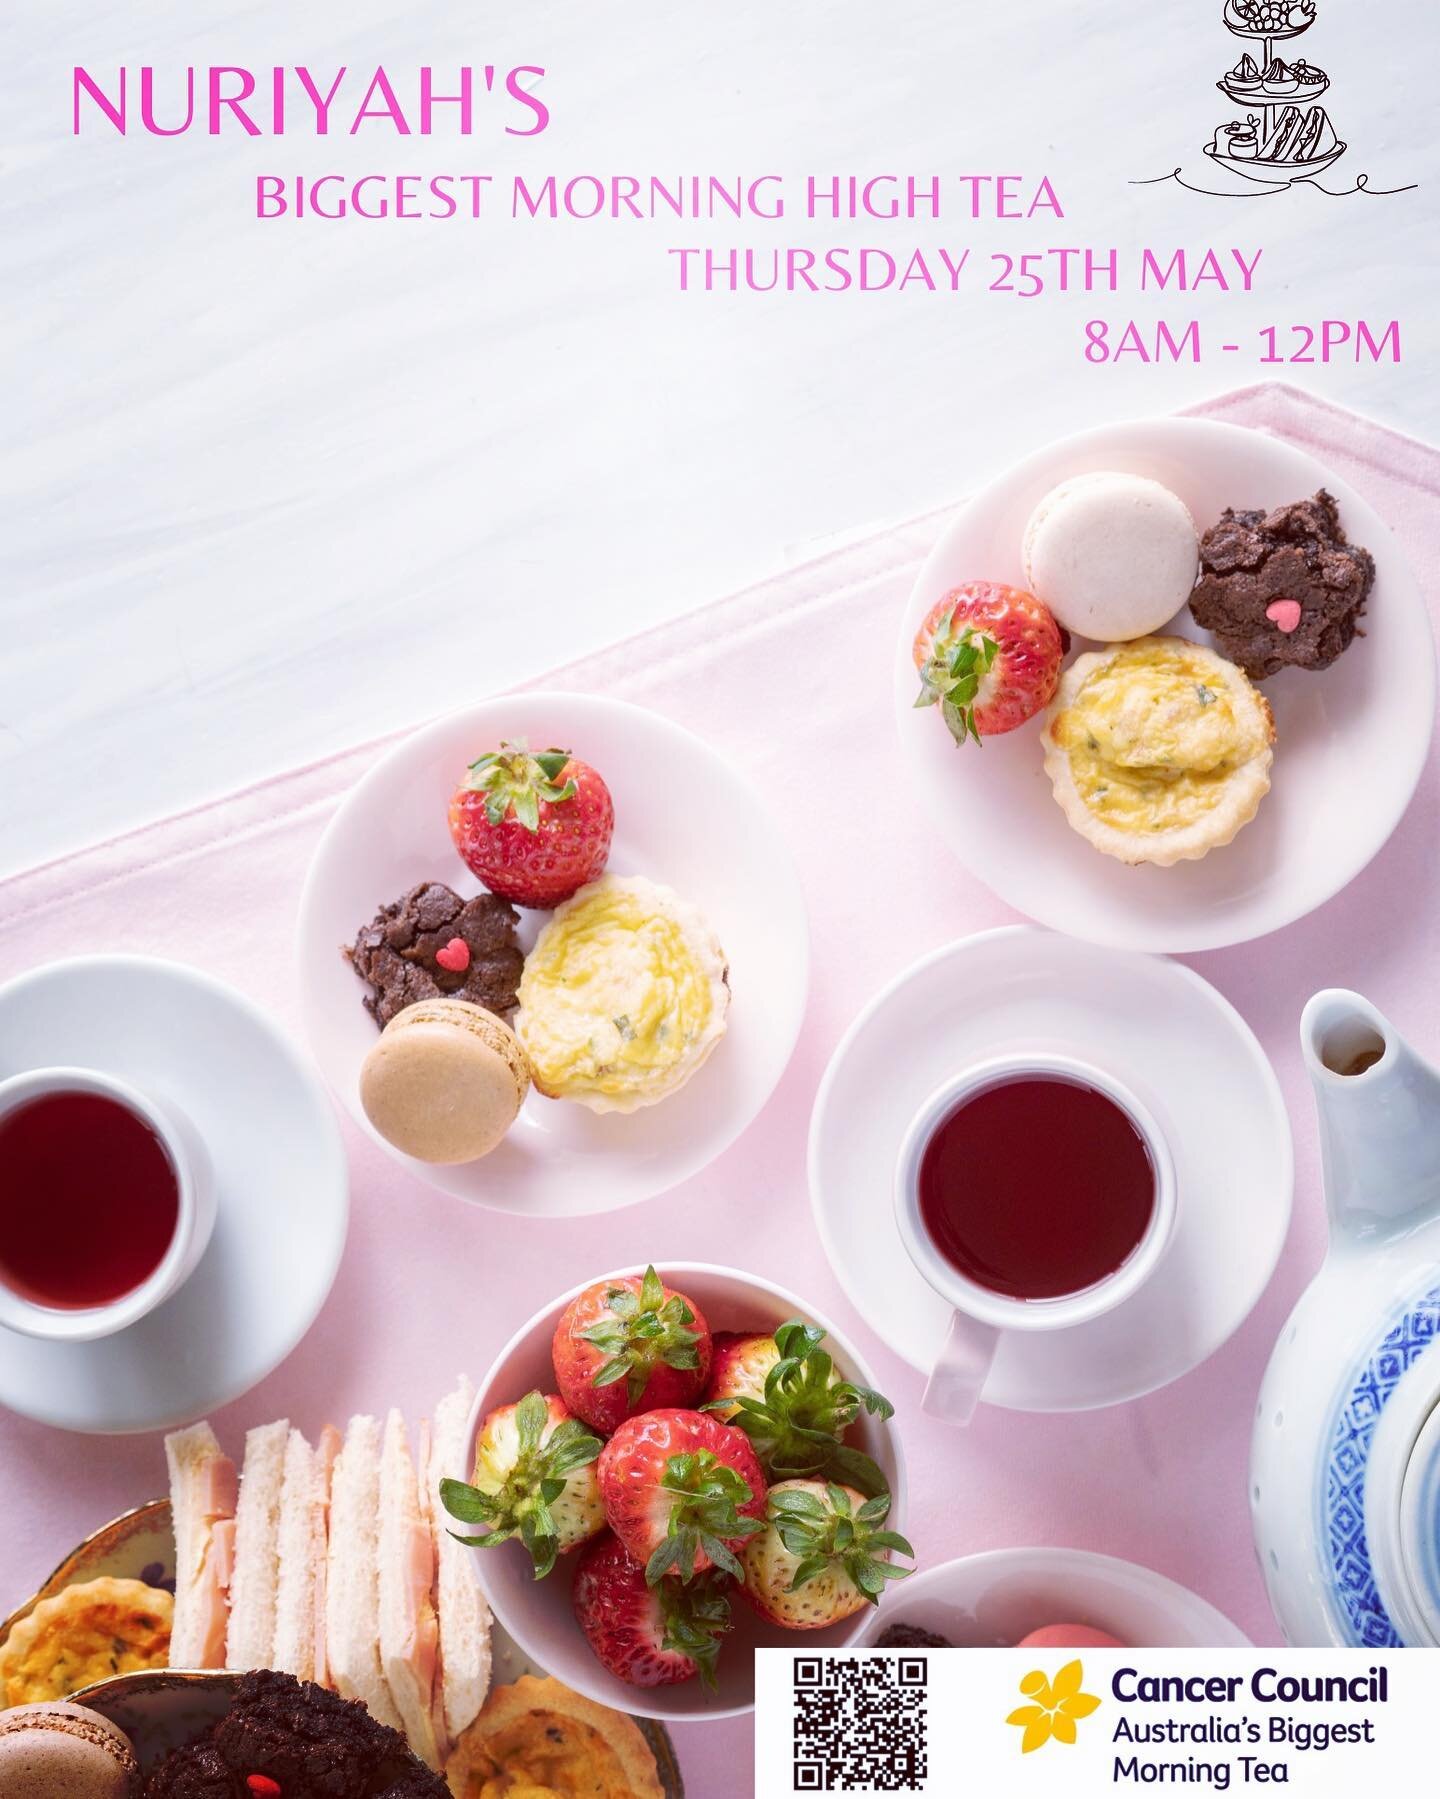 Nuriyah&rsquo;s Biggest Morning Tea! 
-
Le plus grand th&eacute; du matin de Nuriyah !

-

Join us Thursday 25th May as we host our very first Biggest Morning Tea for cancer council. 

Delicious High tea service from 8:30am - 12pm 
$55pp with all pro